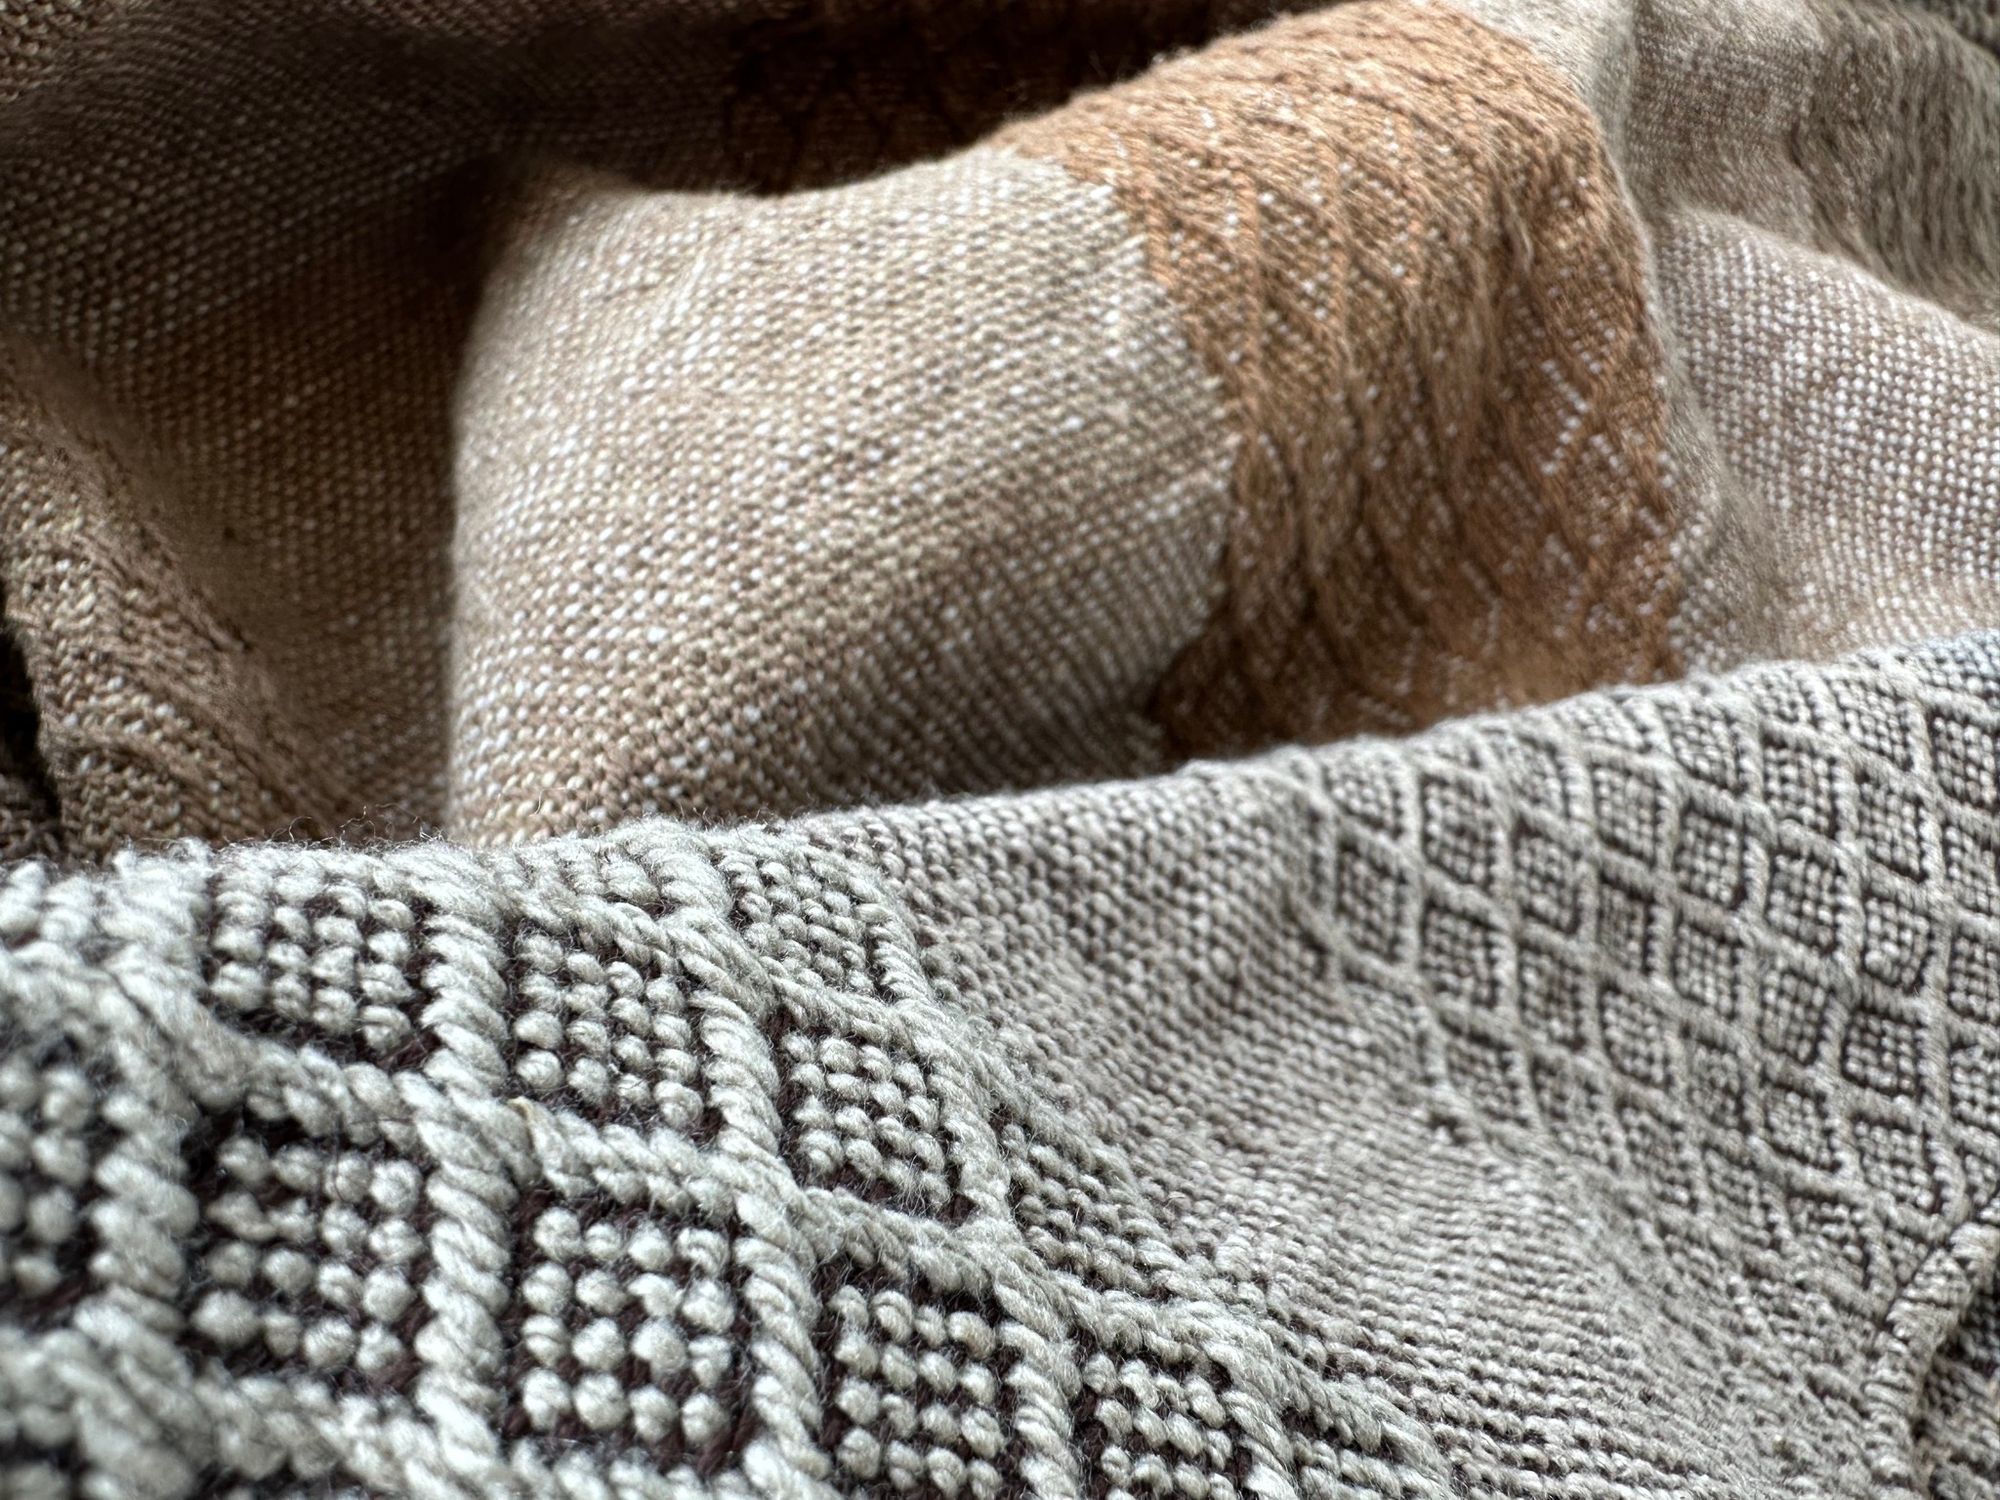 A detail of handwoven softly graded grey to white to brown diamond pattern raw silk fabric